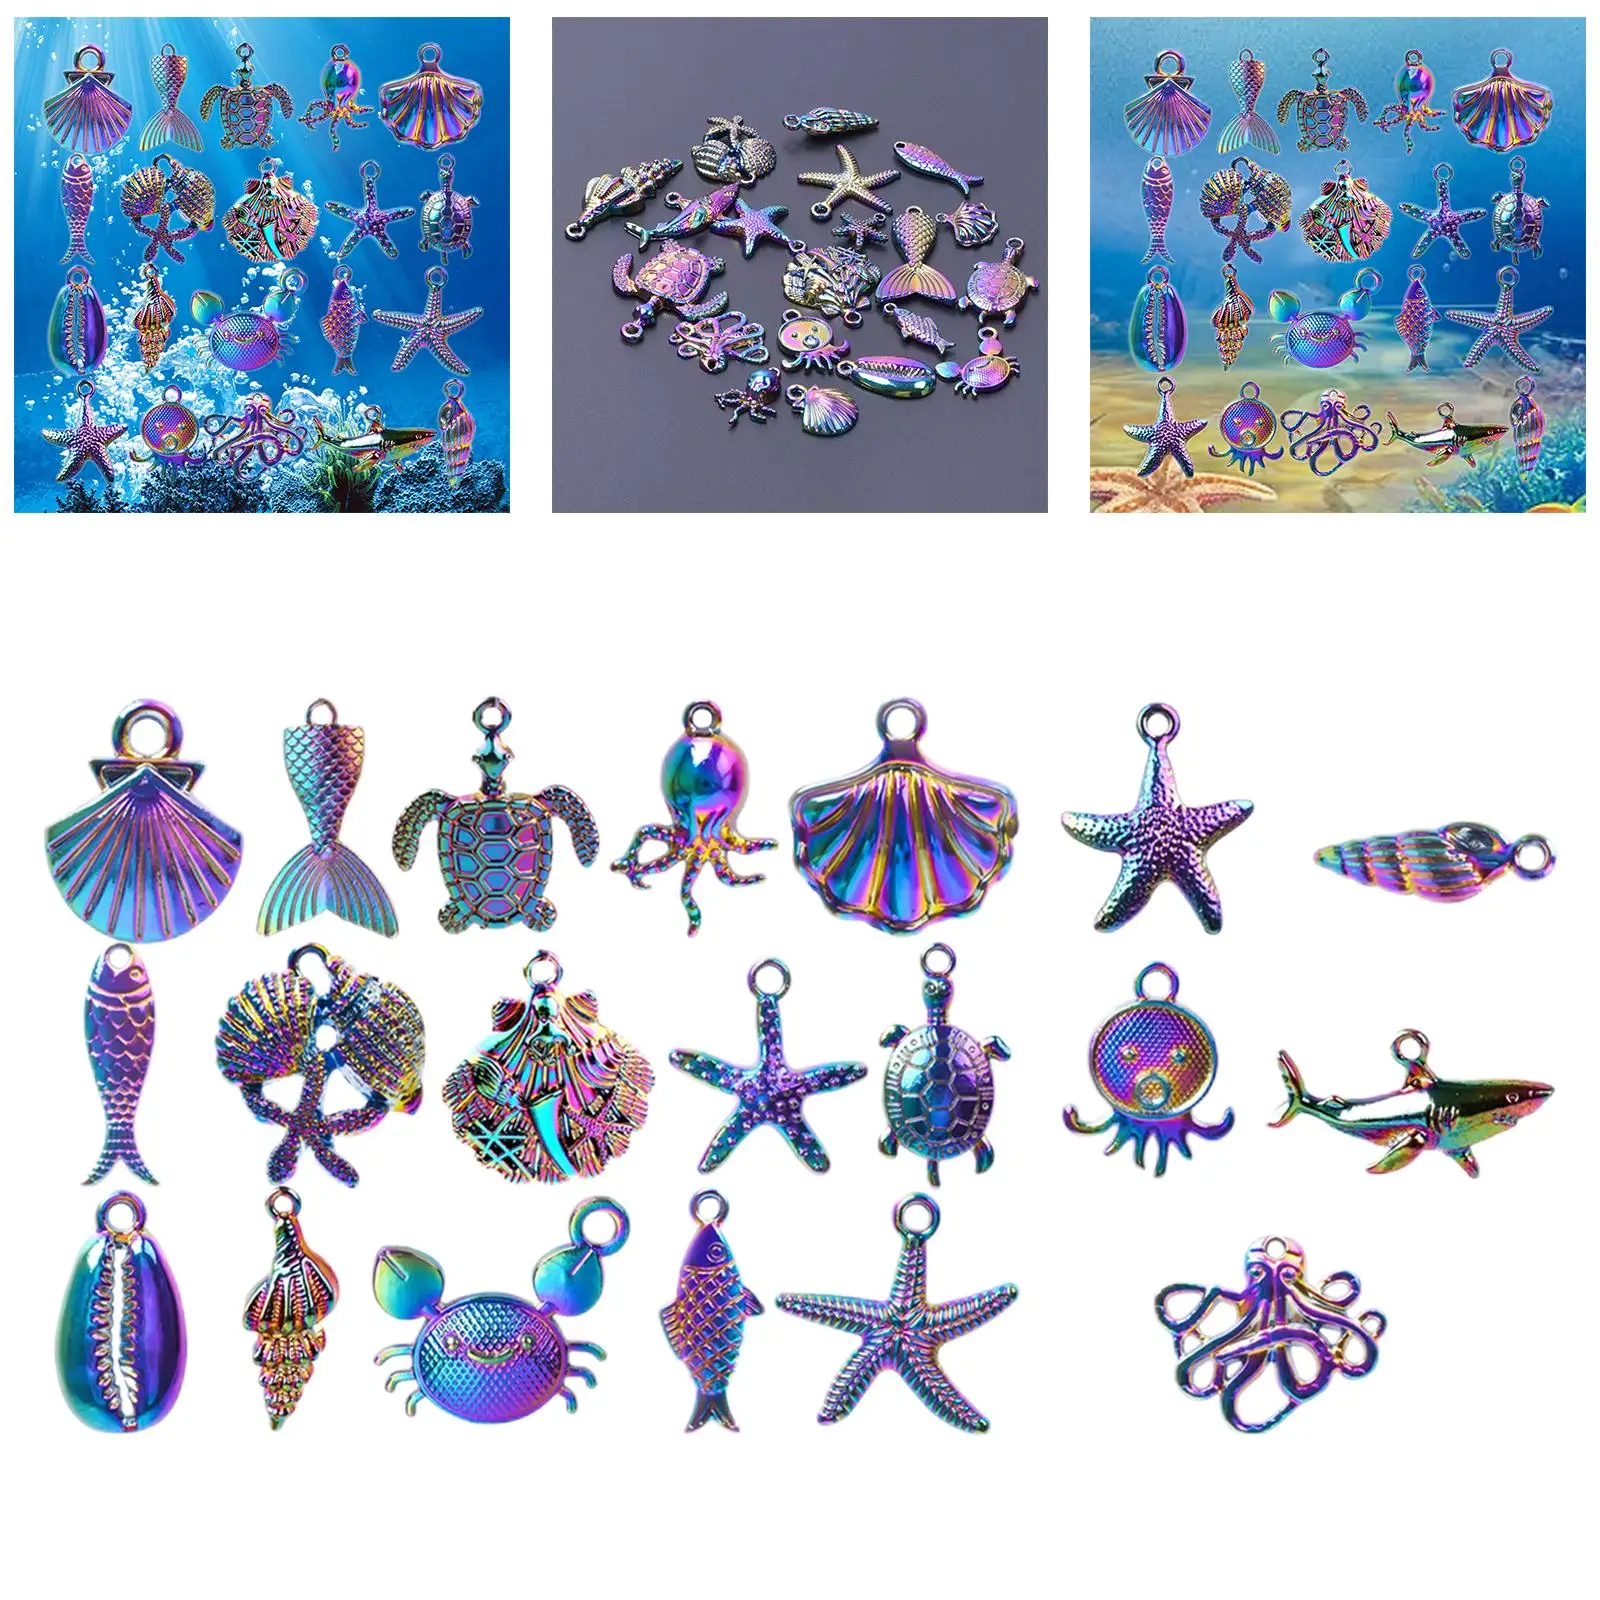 20x Ocean Theme Charms Pendants Starfish Shell Octopus Ocean Elements Charms DIY Pendants for DIY Jewelry Making Key Chains Gift